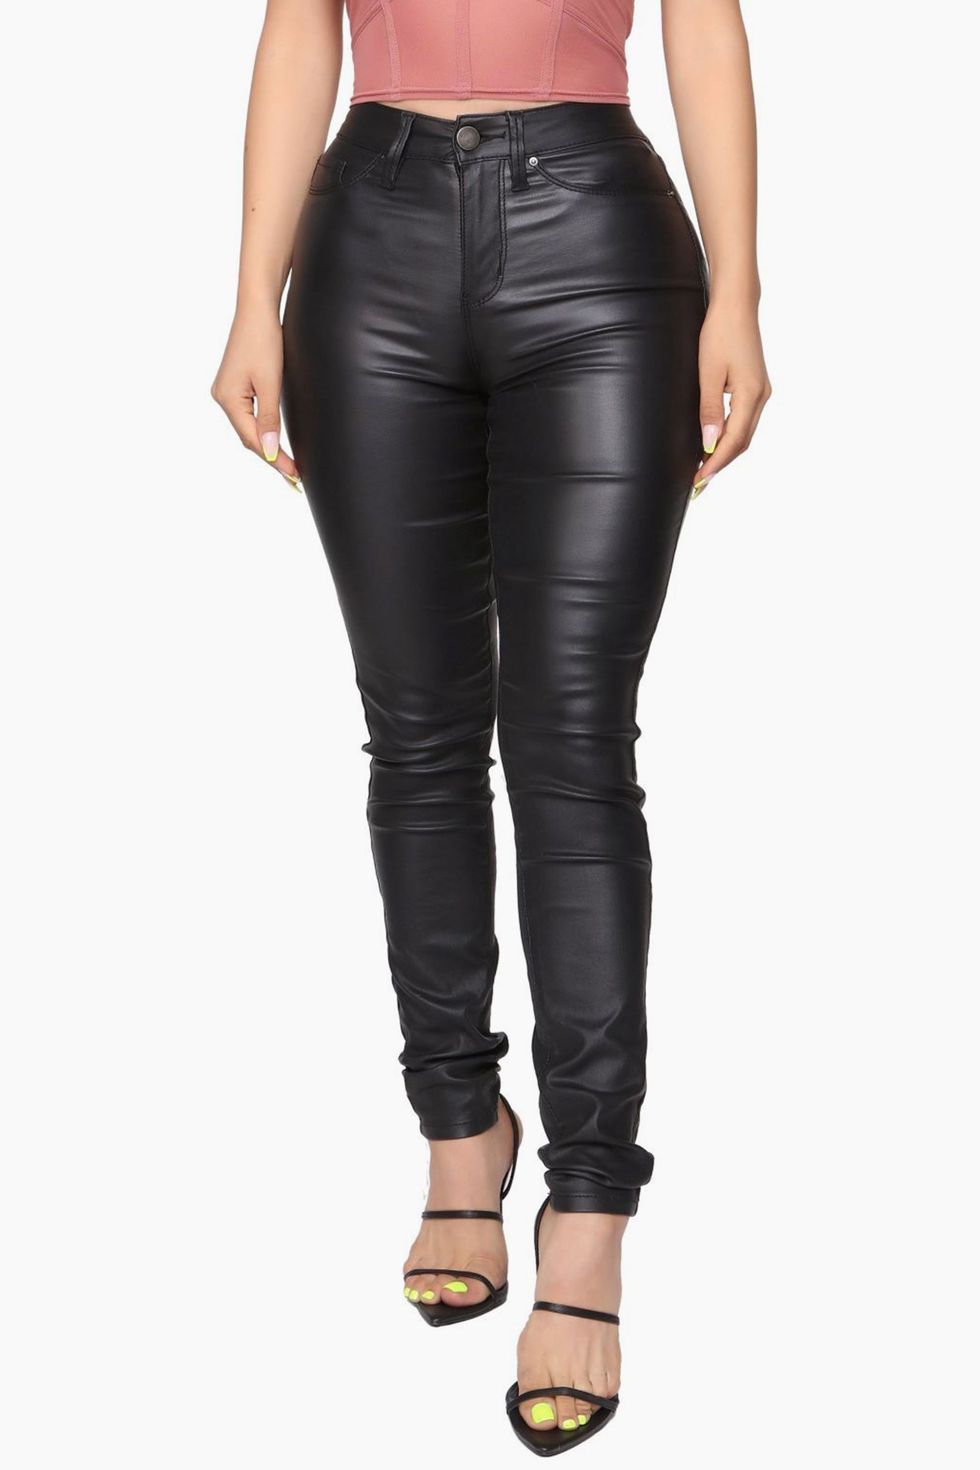 20 Best Leather Pants of 2023